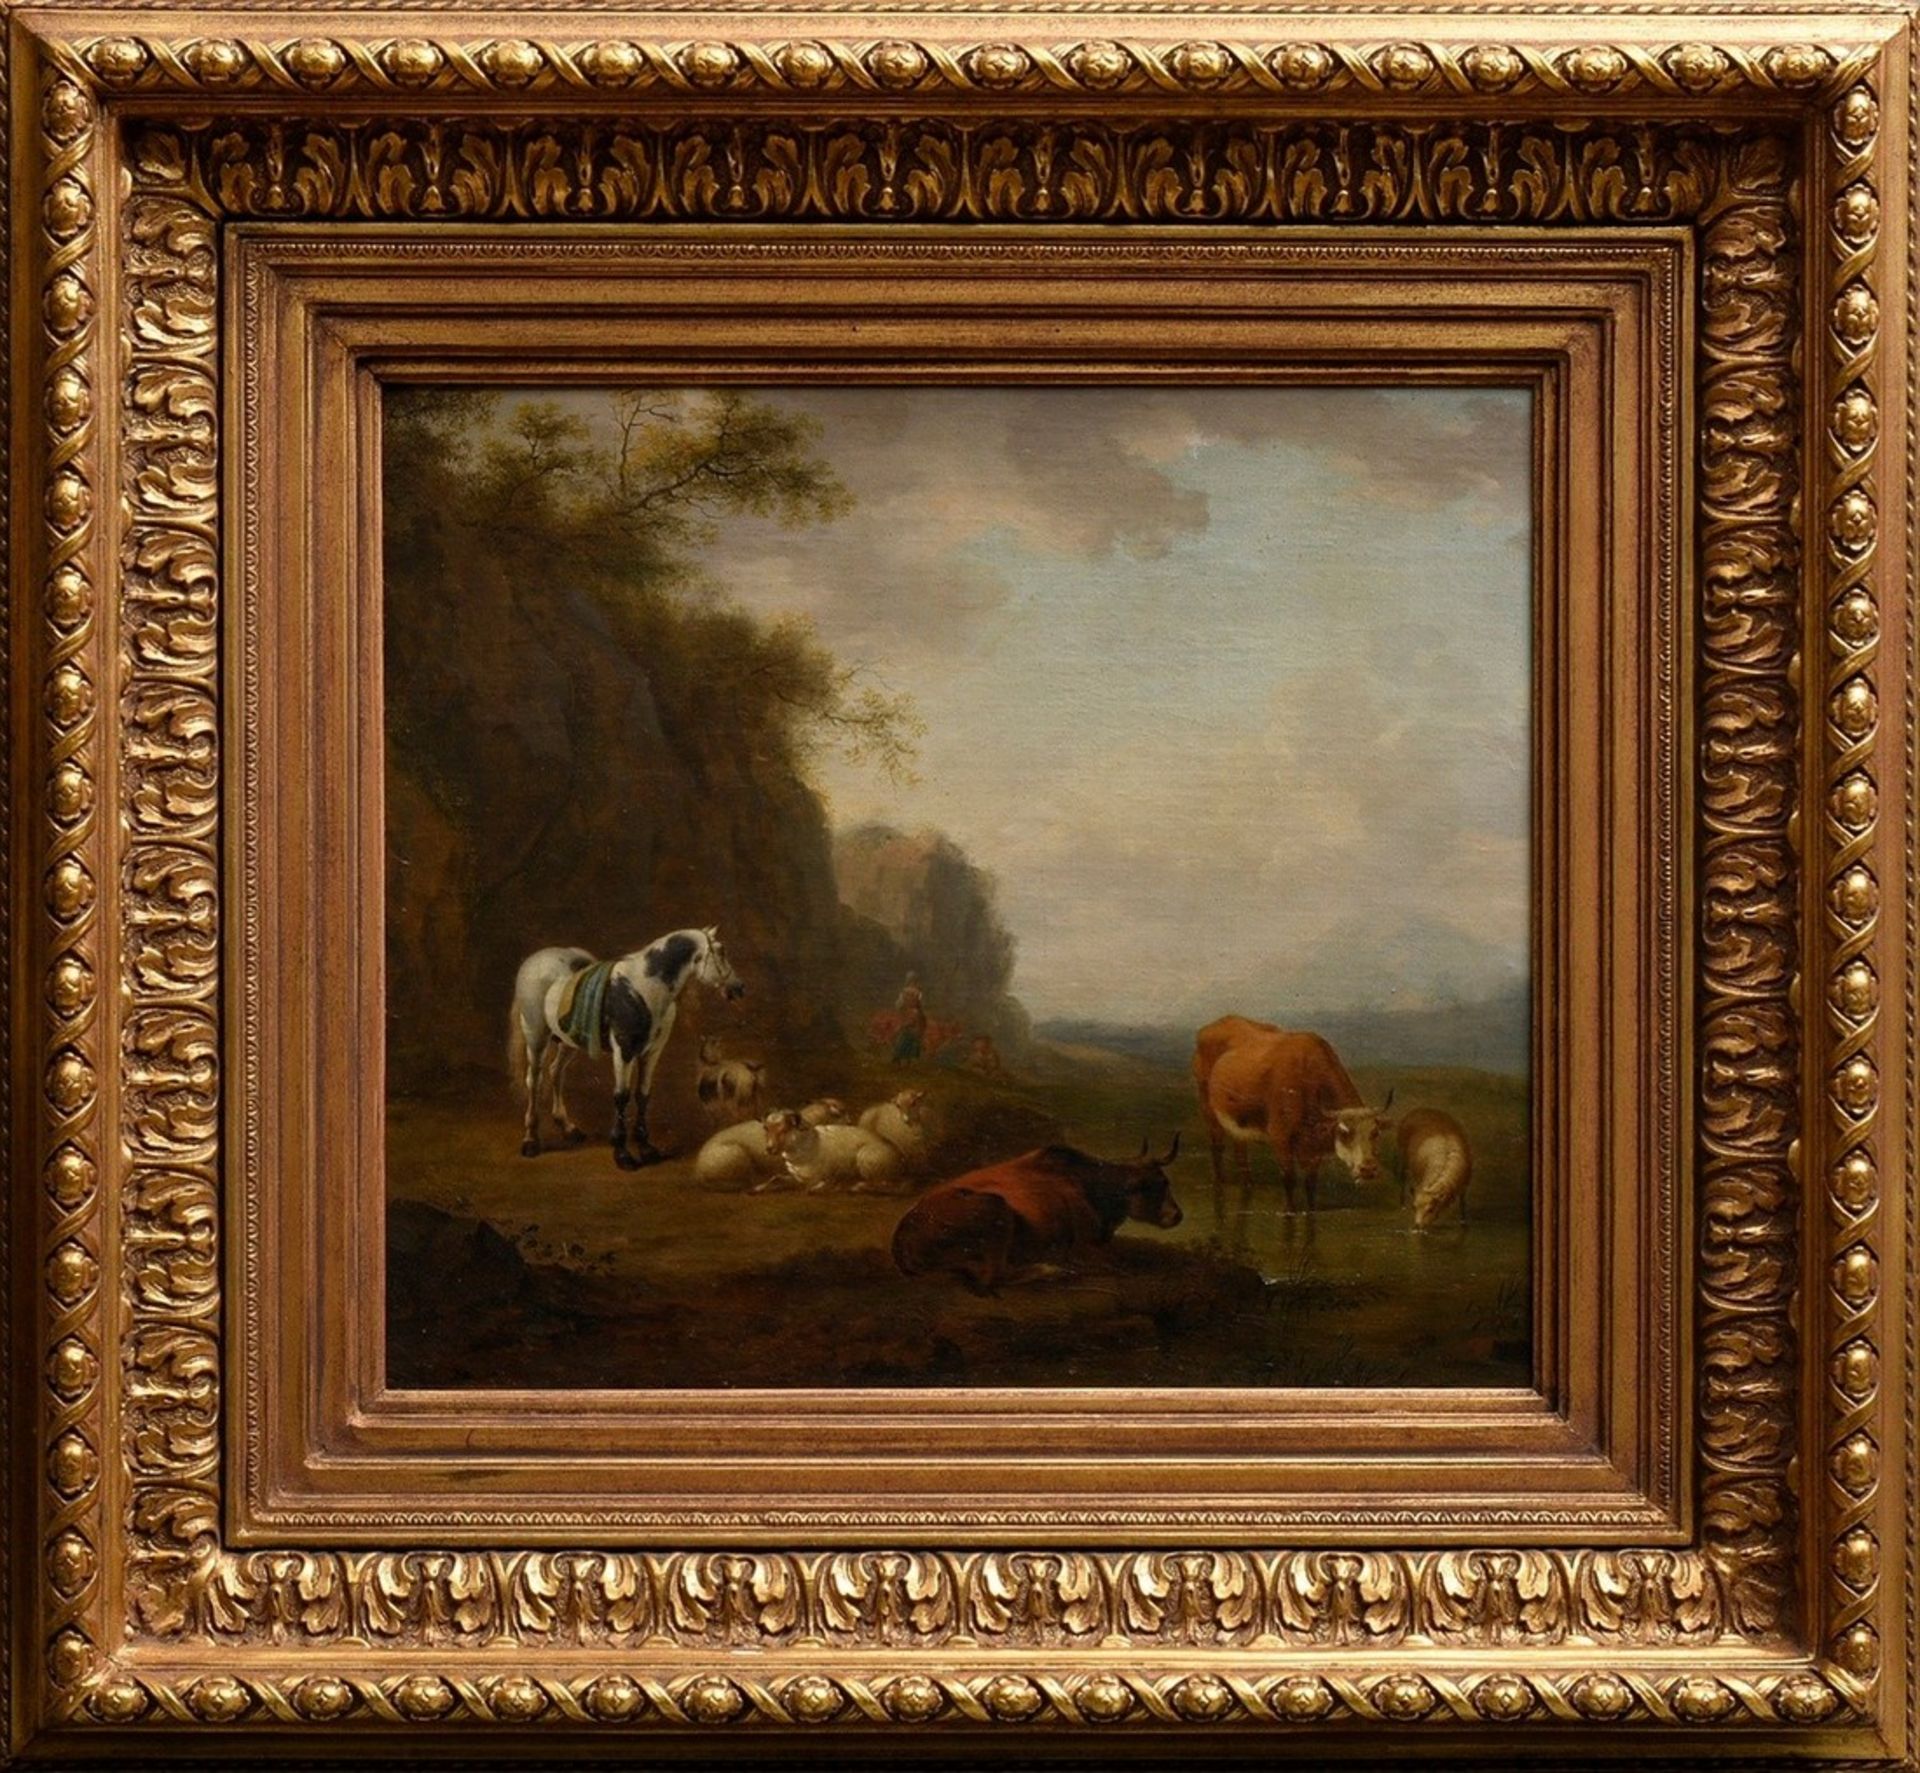 Calraet, Abraham van (1642-1722) "Herd at the Watering Trough", oil/canvas, inscr. on verso, magnif - Image 2 of 7